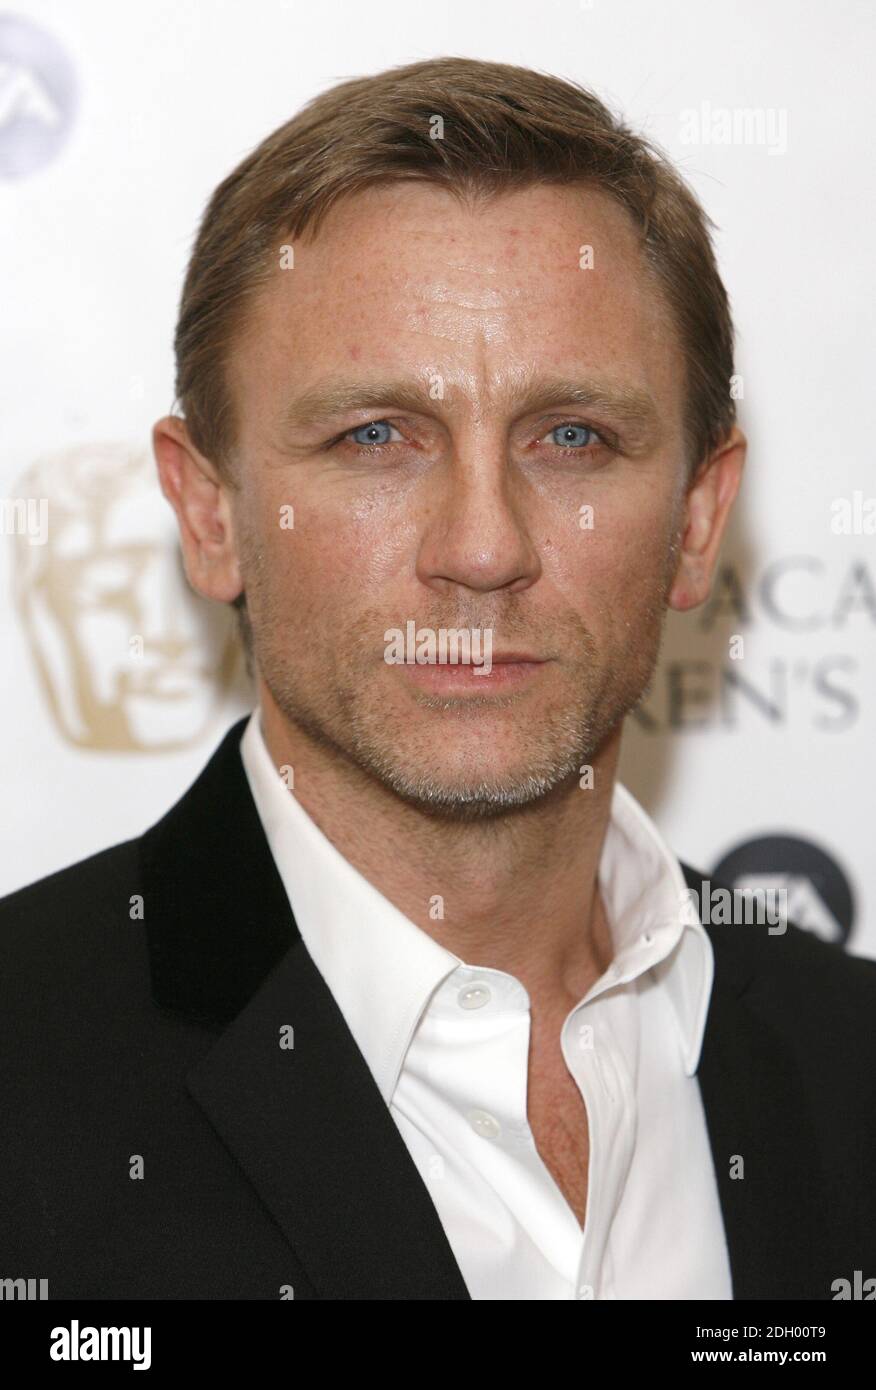 Daniel Craig at the 12th British Academy of Film and Television Children's Awards at The Hilton Hotel, Park Lane in central London. Stock Photo